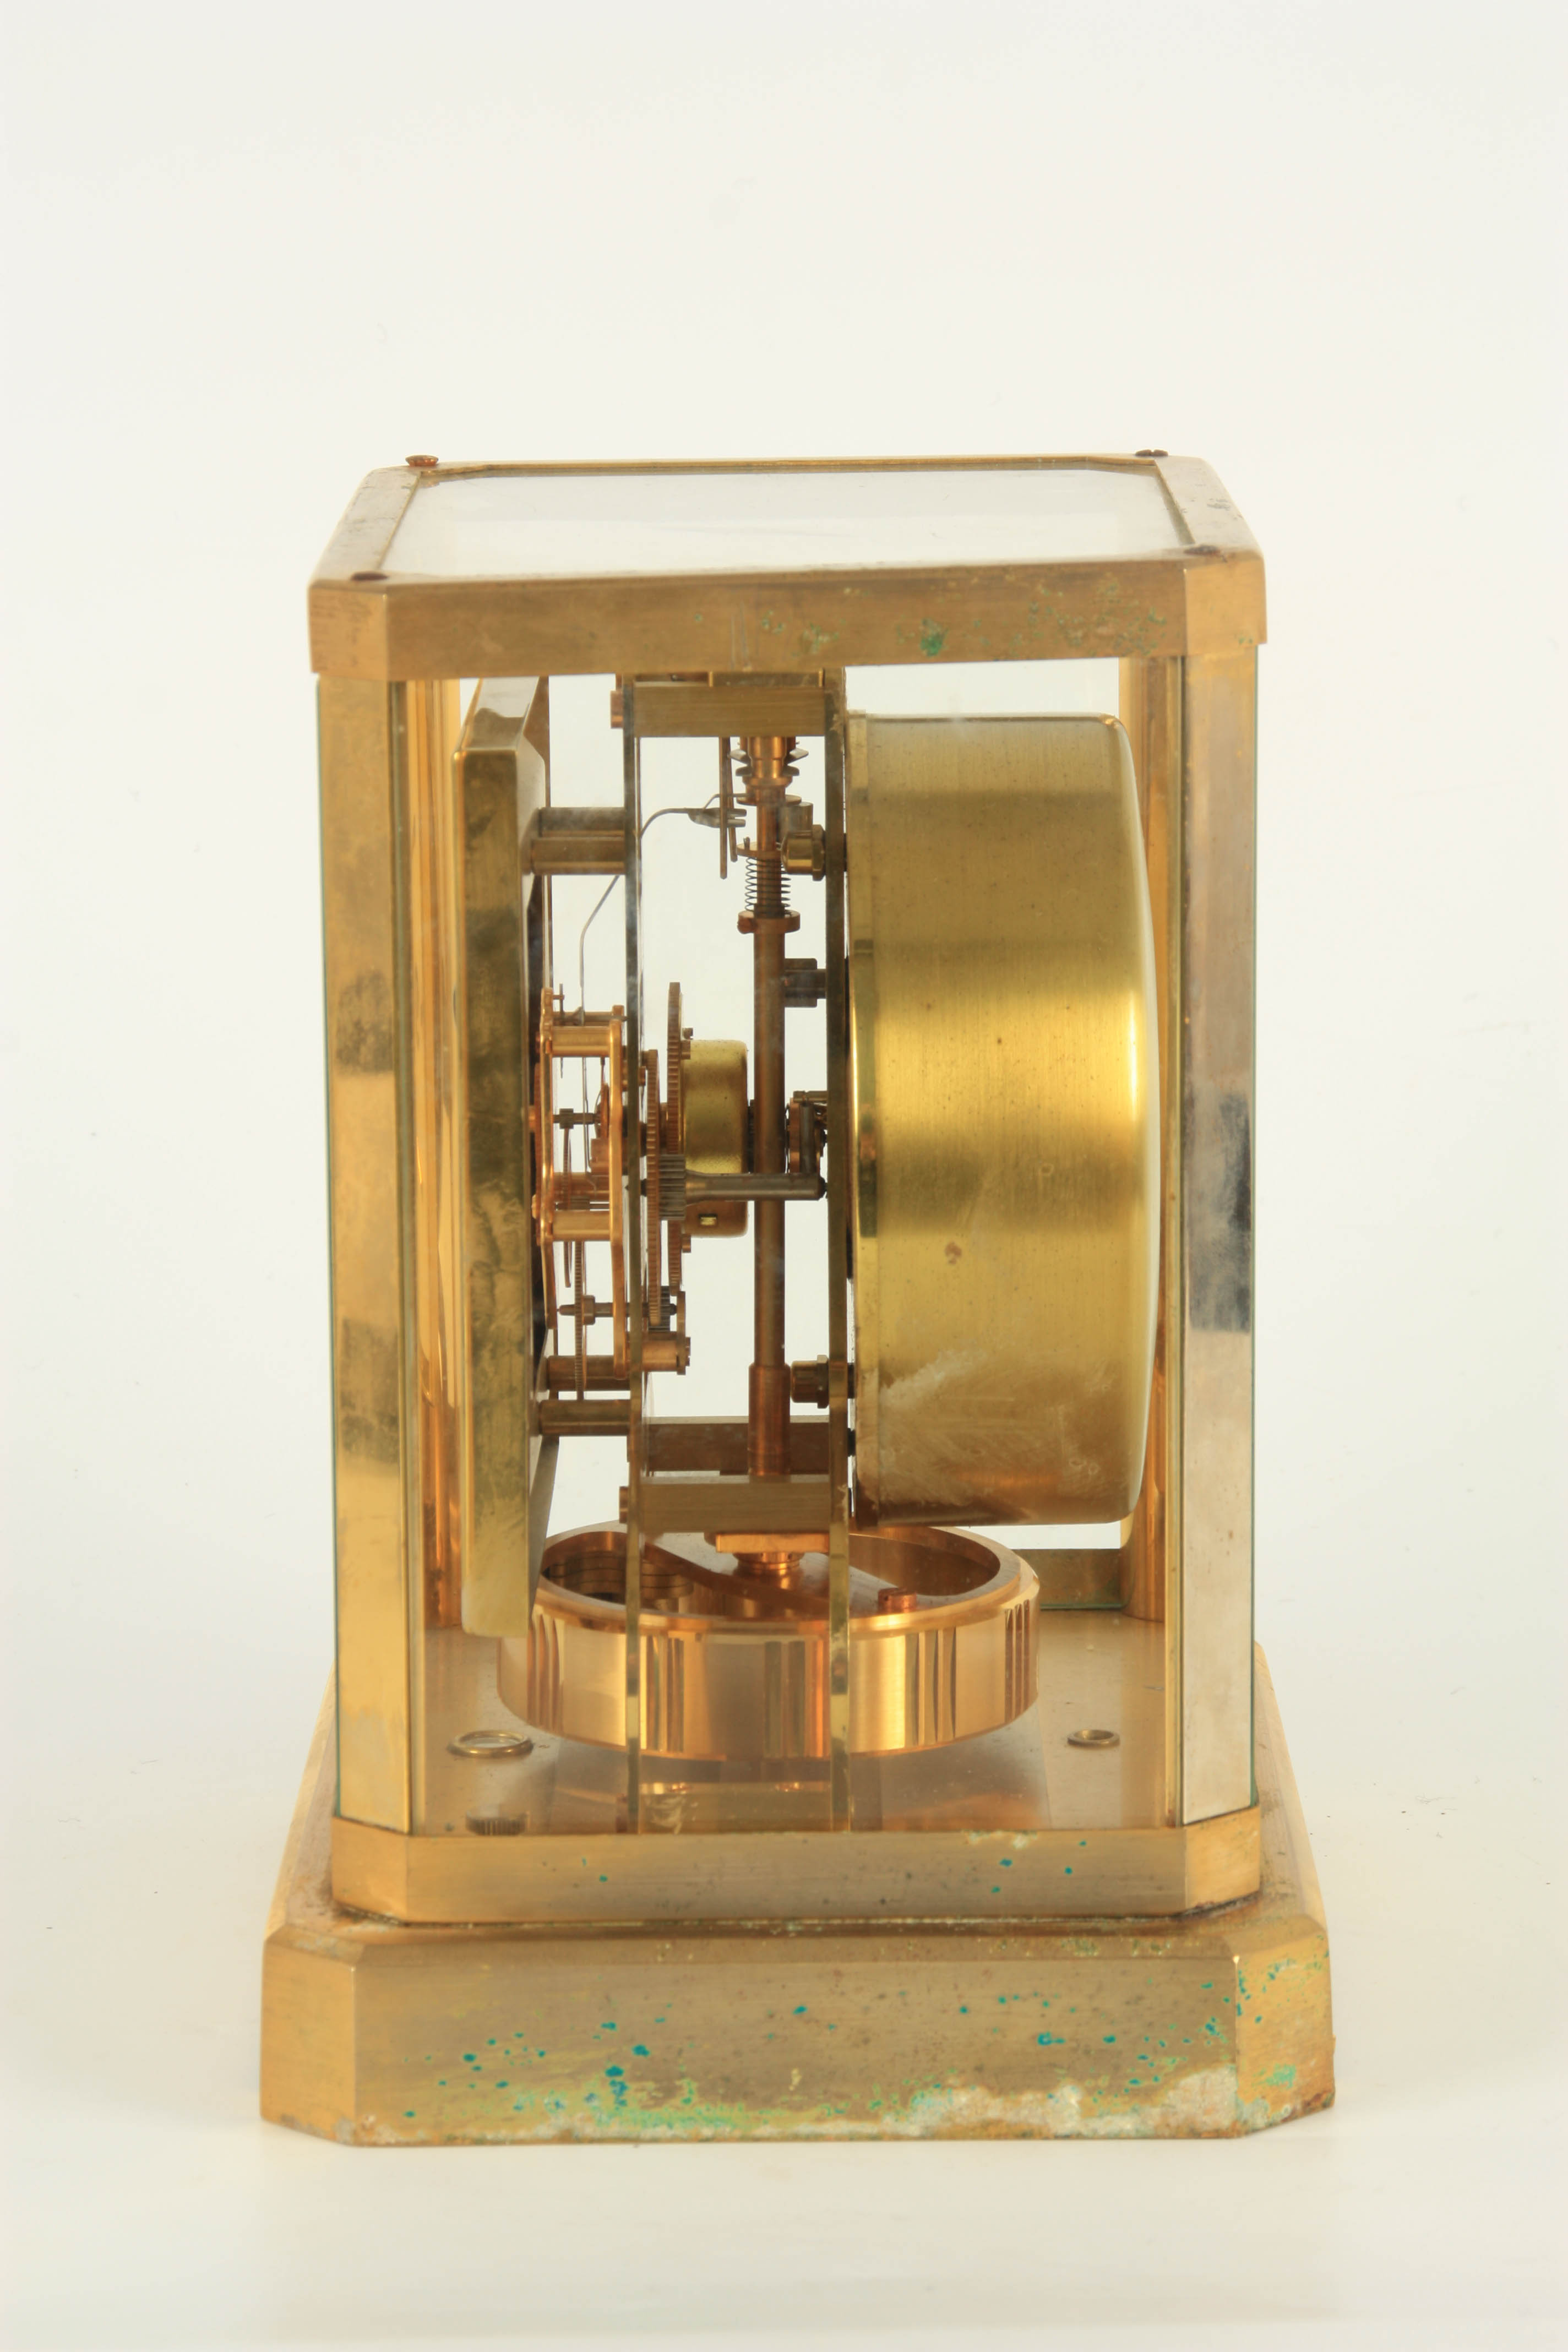 A JAEGER-LECOULTRE ATMOS CLOCK the gilt brass framed case with removable front glass panel enclosing - Image 5 of 8